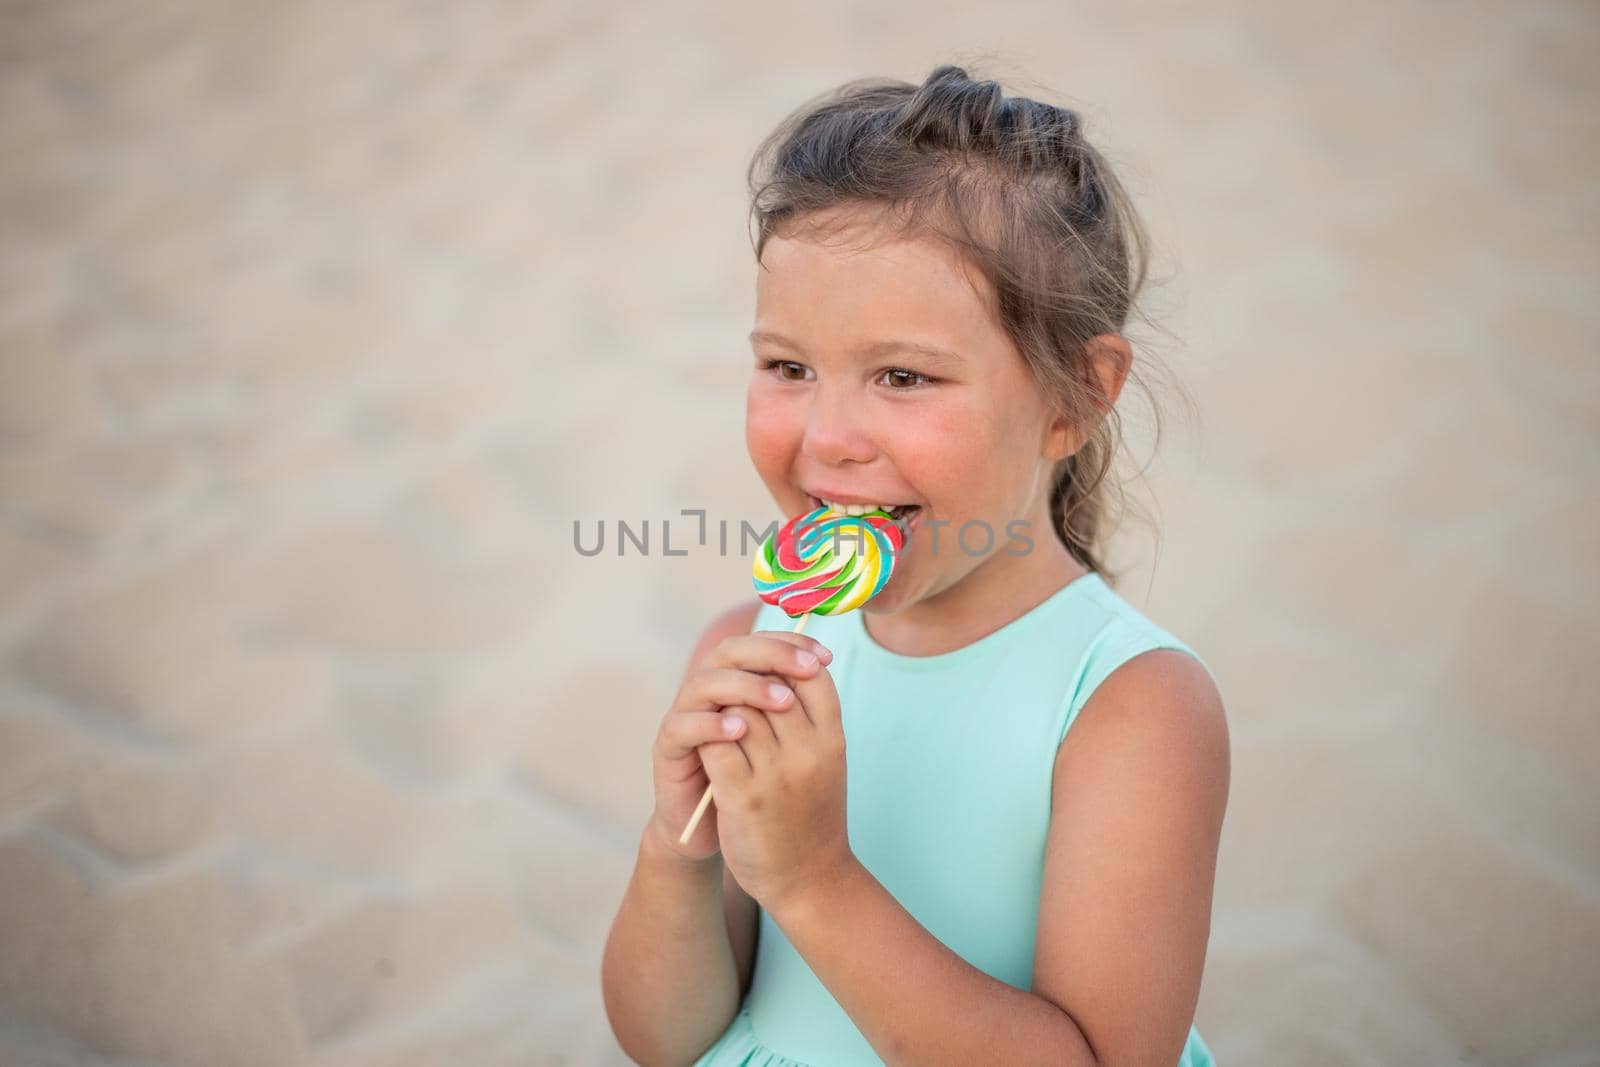 Cute little girl with big colorful lollipop. Child eating sweet candy bar. Sweets for young kids. Summer outdoor fun